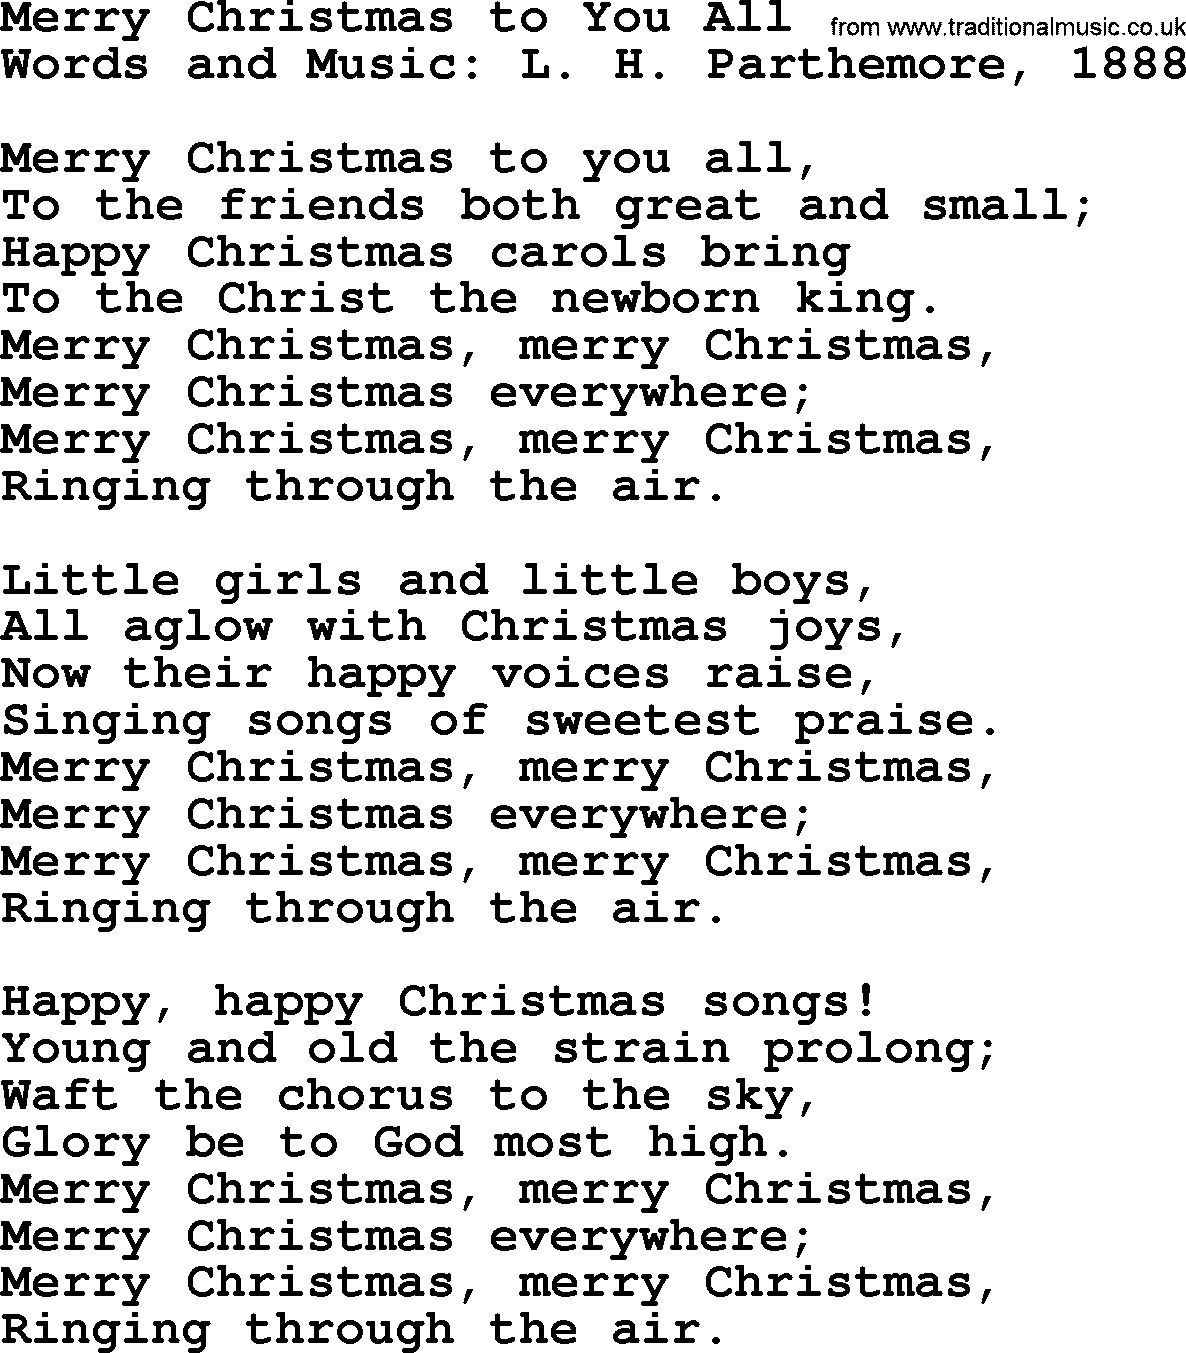 280 Christmas Hymns and songs with PowerPoints and PDF, title: Merry Christmas To You All, lyrics, PPT and PDF